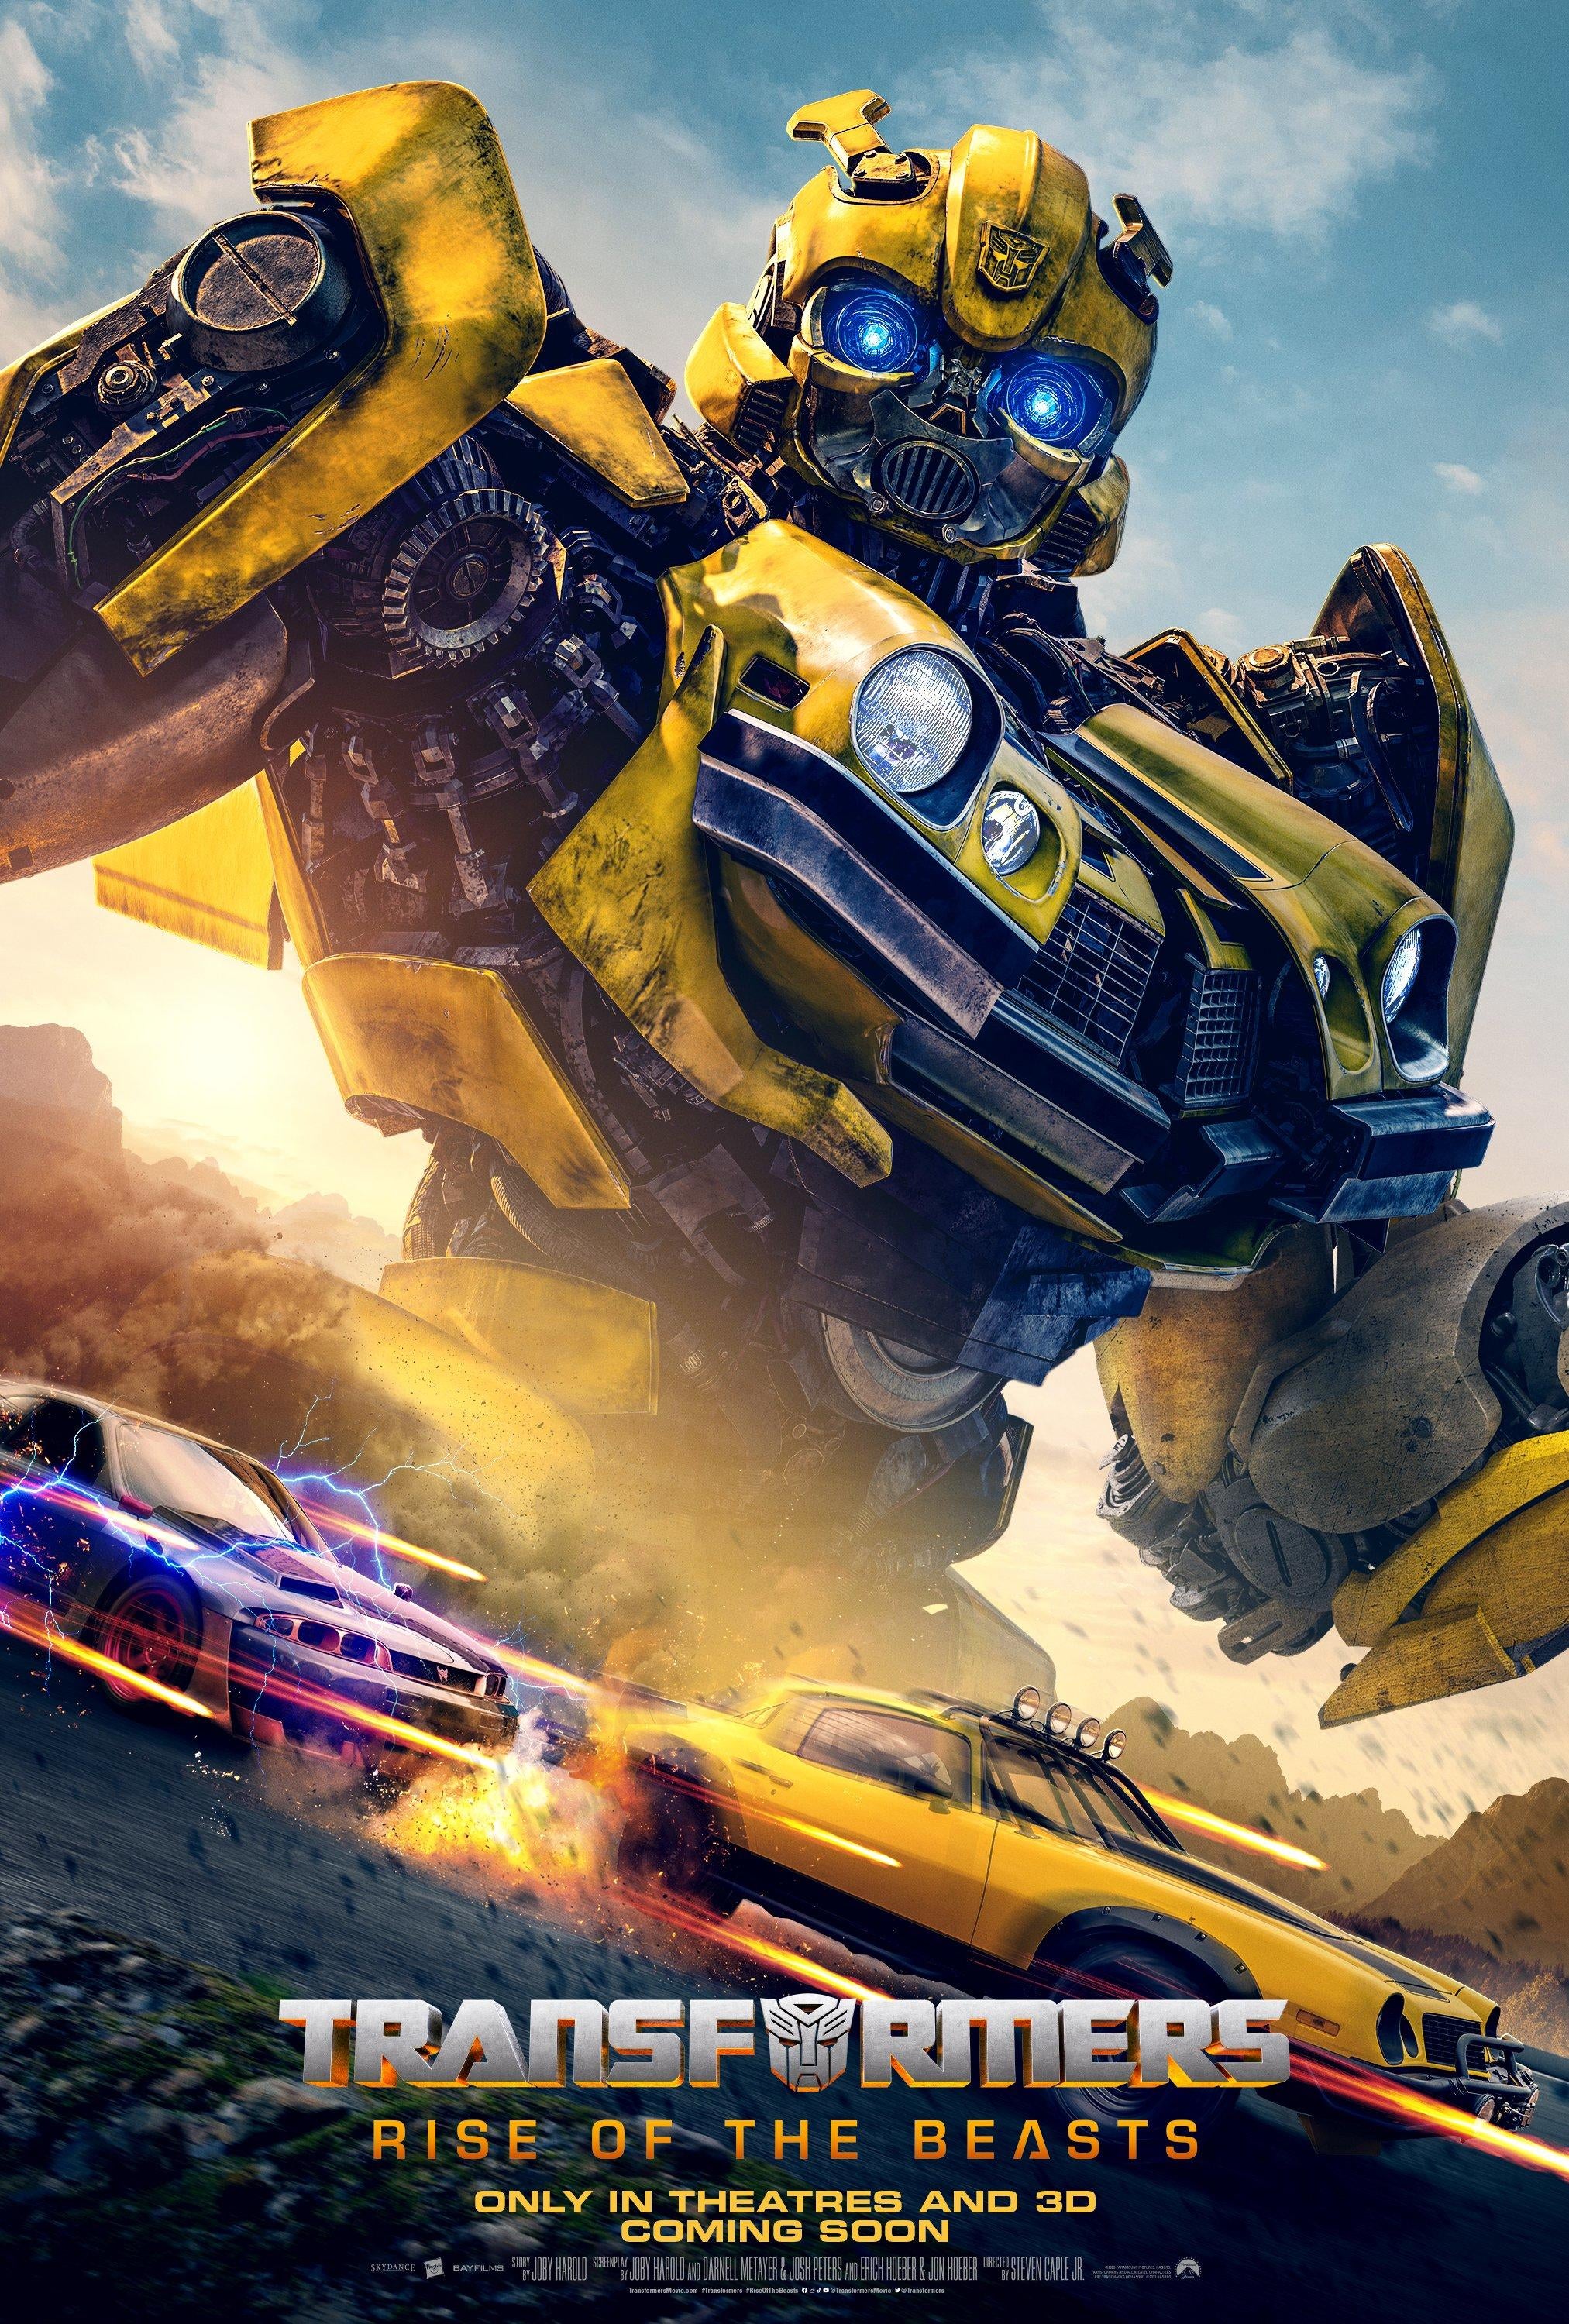 transformers-rise-of-the-beasts-bumblebee-poster.jpg